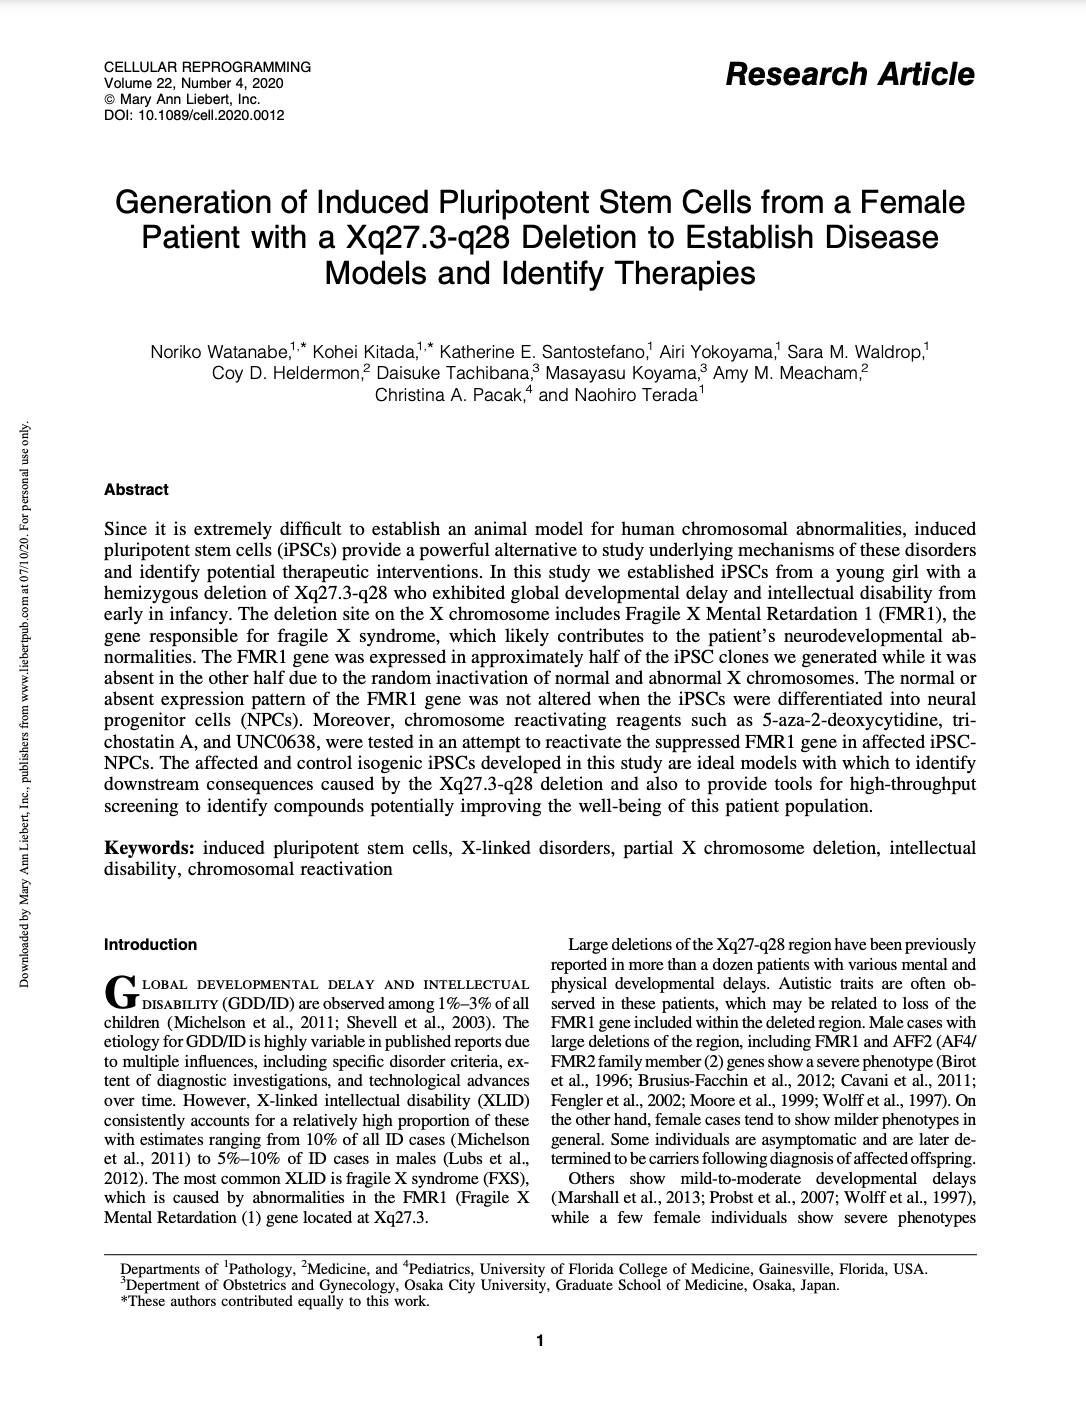 Generation of Induced Pluripotent Stem Cells in Female with Xq27 deletion